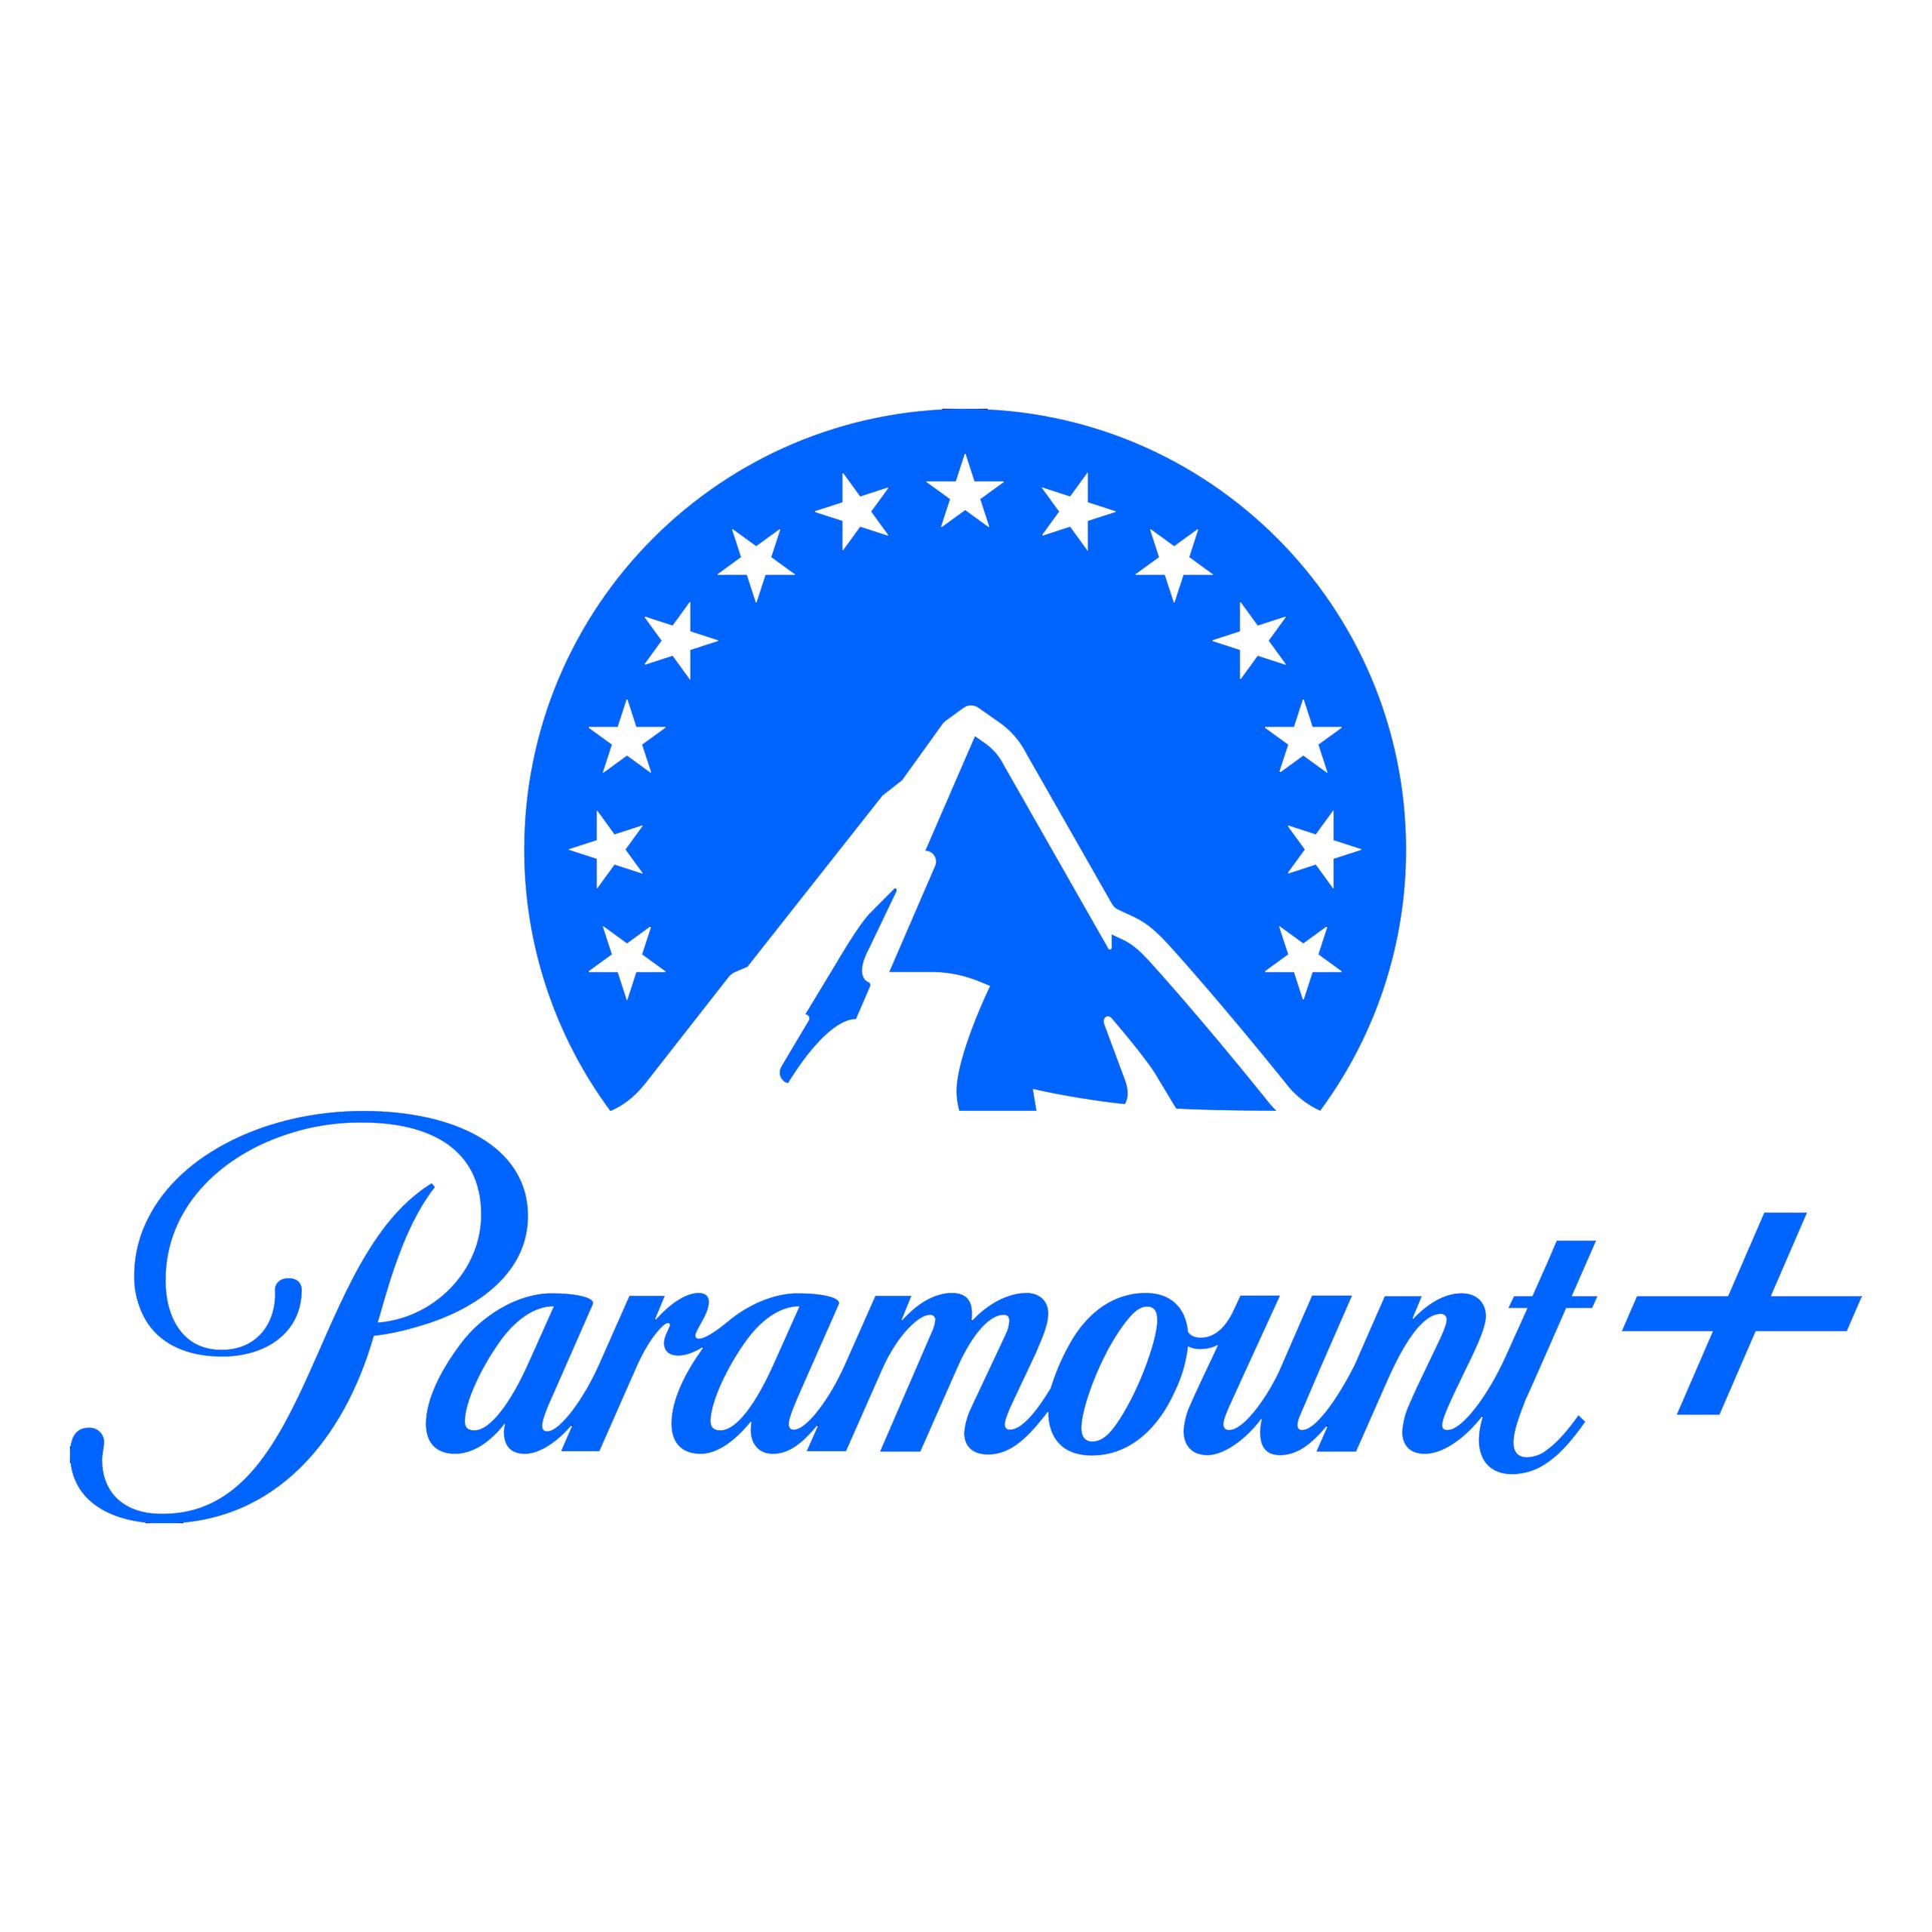 Logo of Paramount Plus, depicting a blue mountain peak encircled by stars with the service's name beside it.